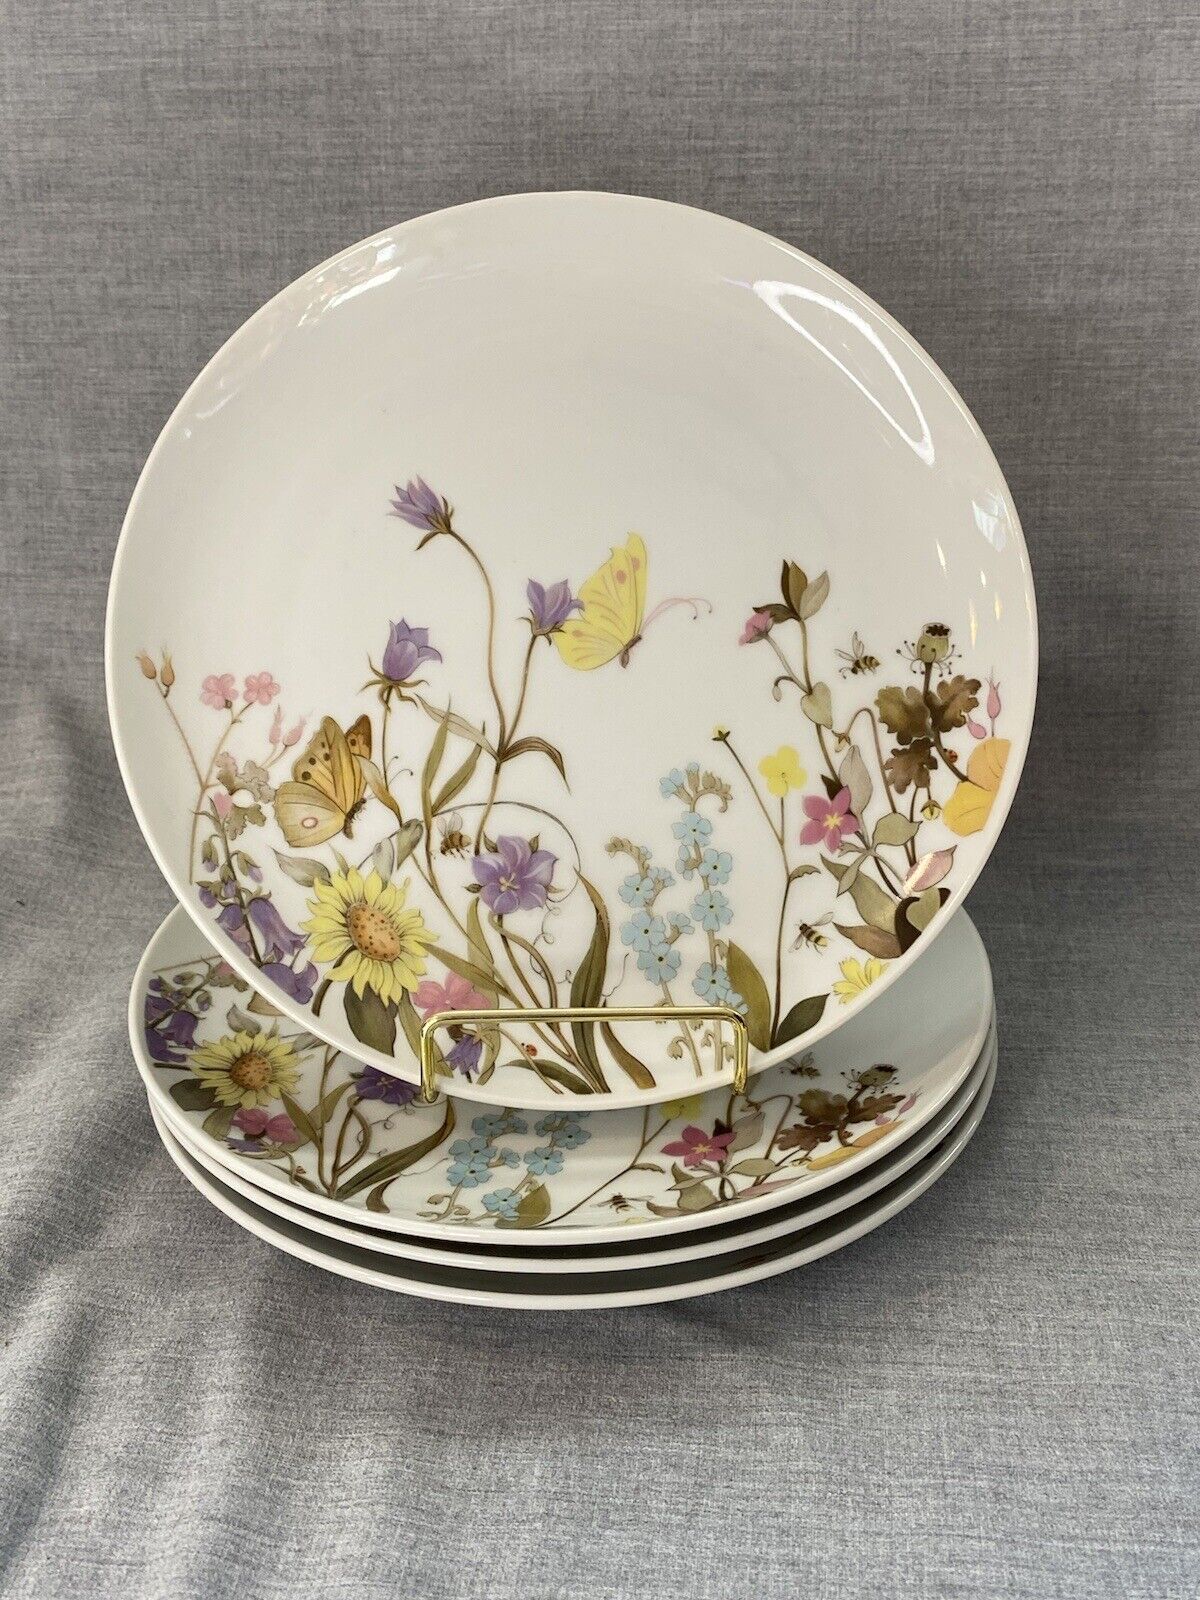 4 Fine China Enesco 1975 Nature Garden Society Floral Plate with Butterflies 8”